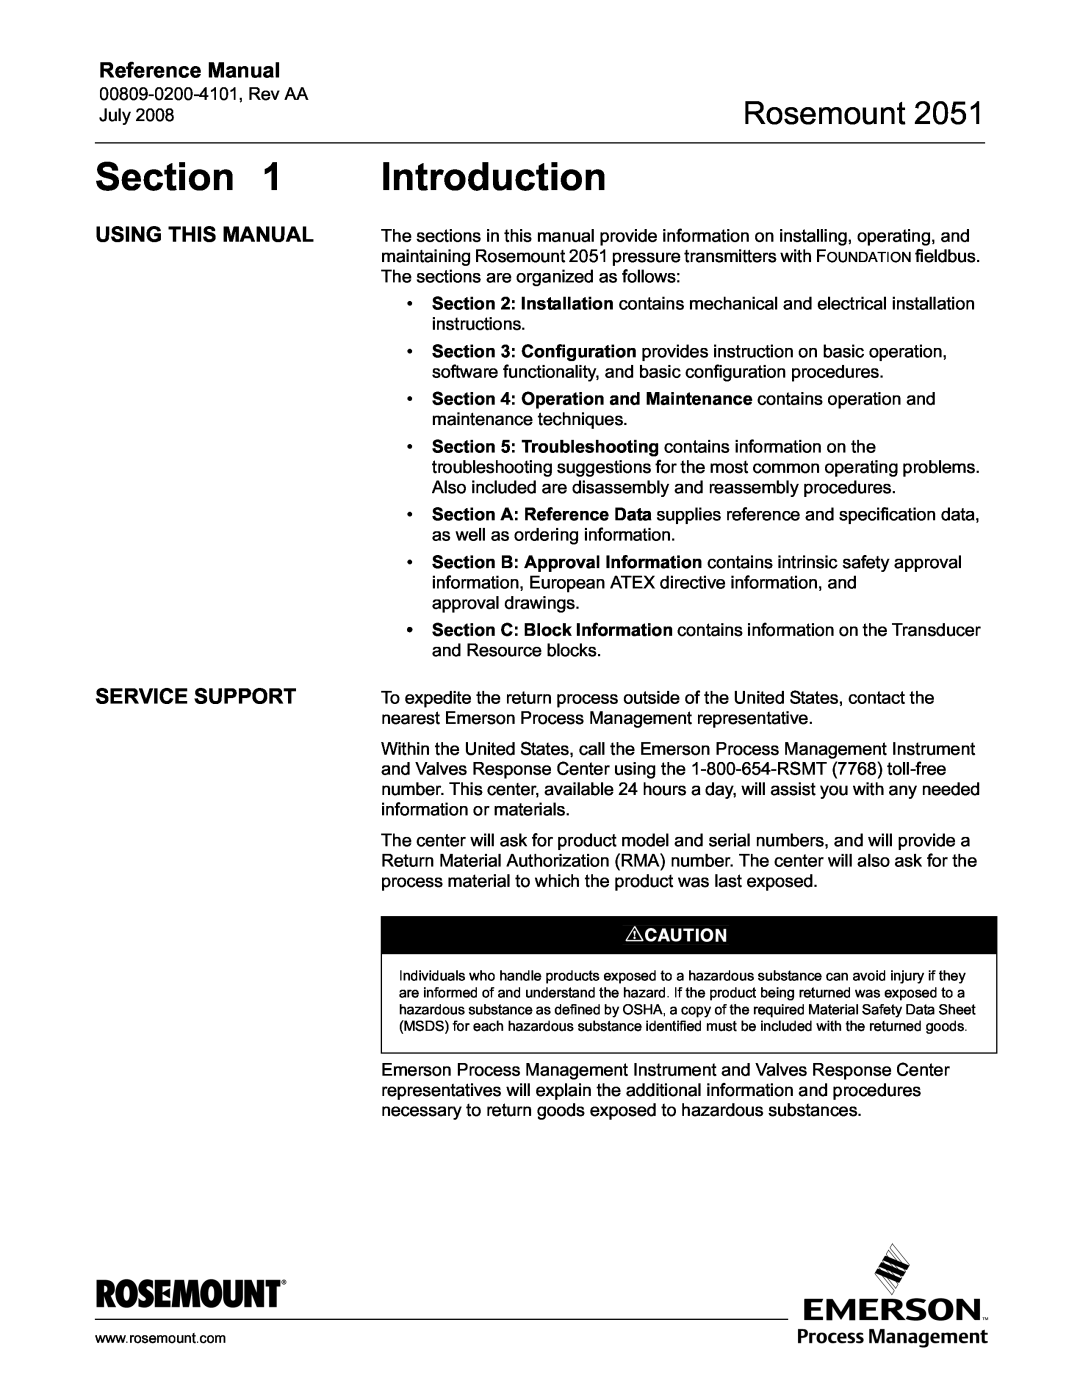 Emerson Process Management 2051 Section, Introduction, Using This Manual Service Support, Rosemount, Reference Manual 